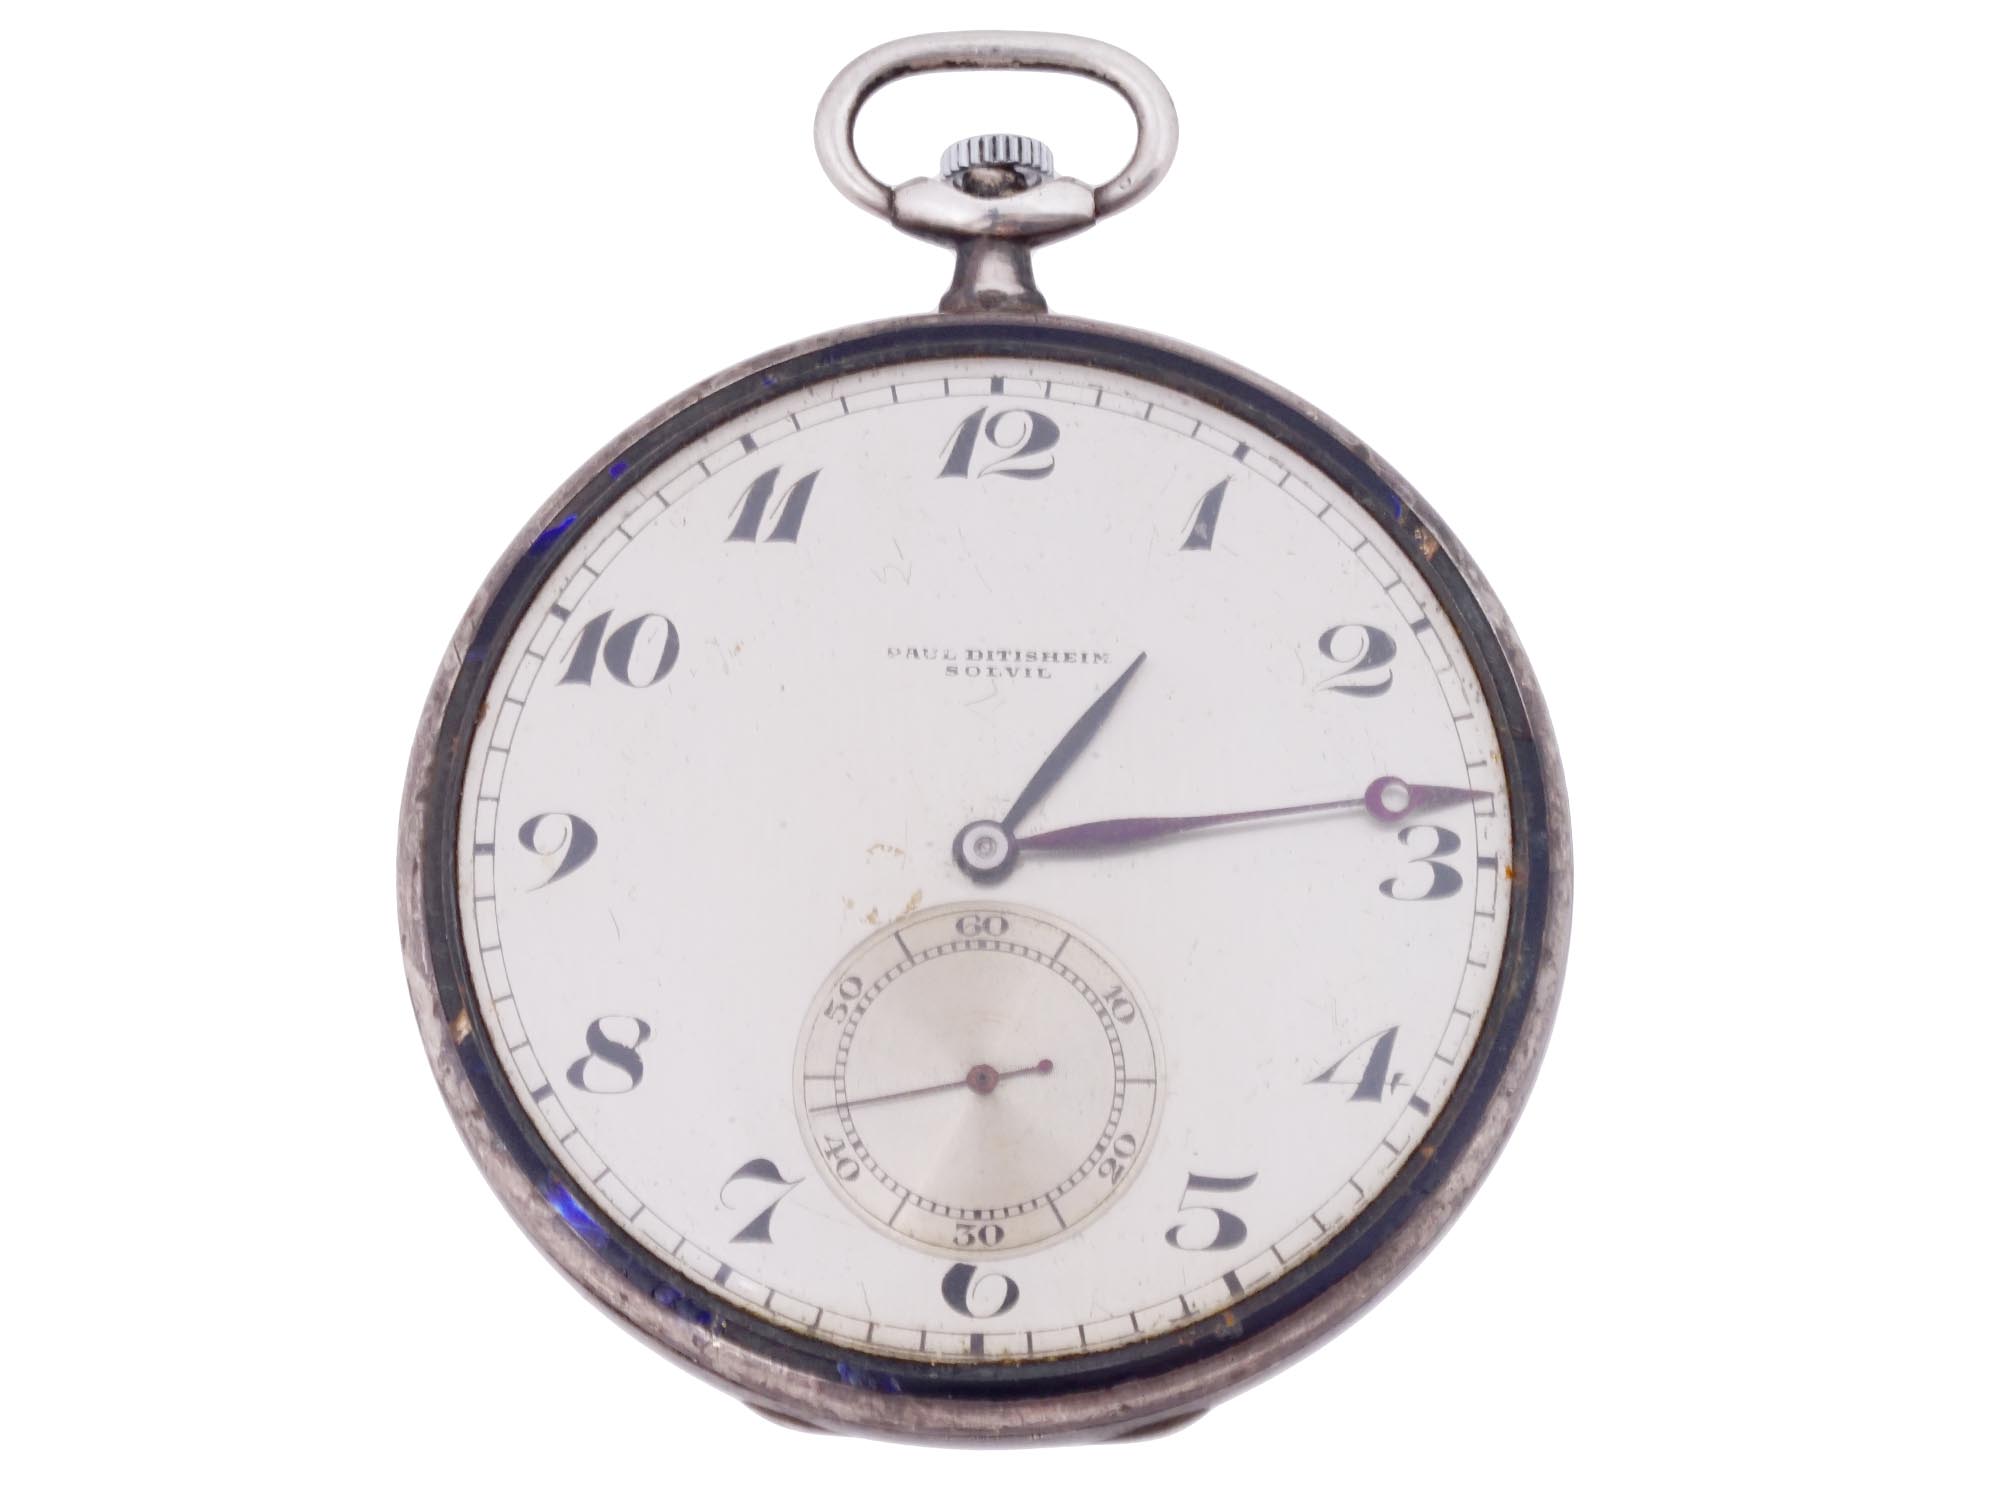 ANTIQUE PAUL DITISHEIM STERLING SILVER POCKET WATCH PIC-0